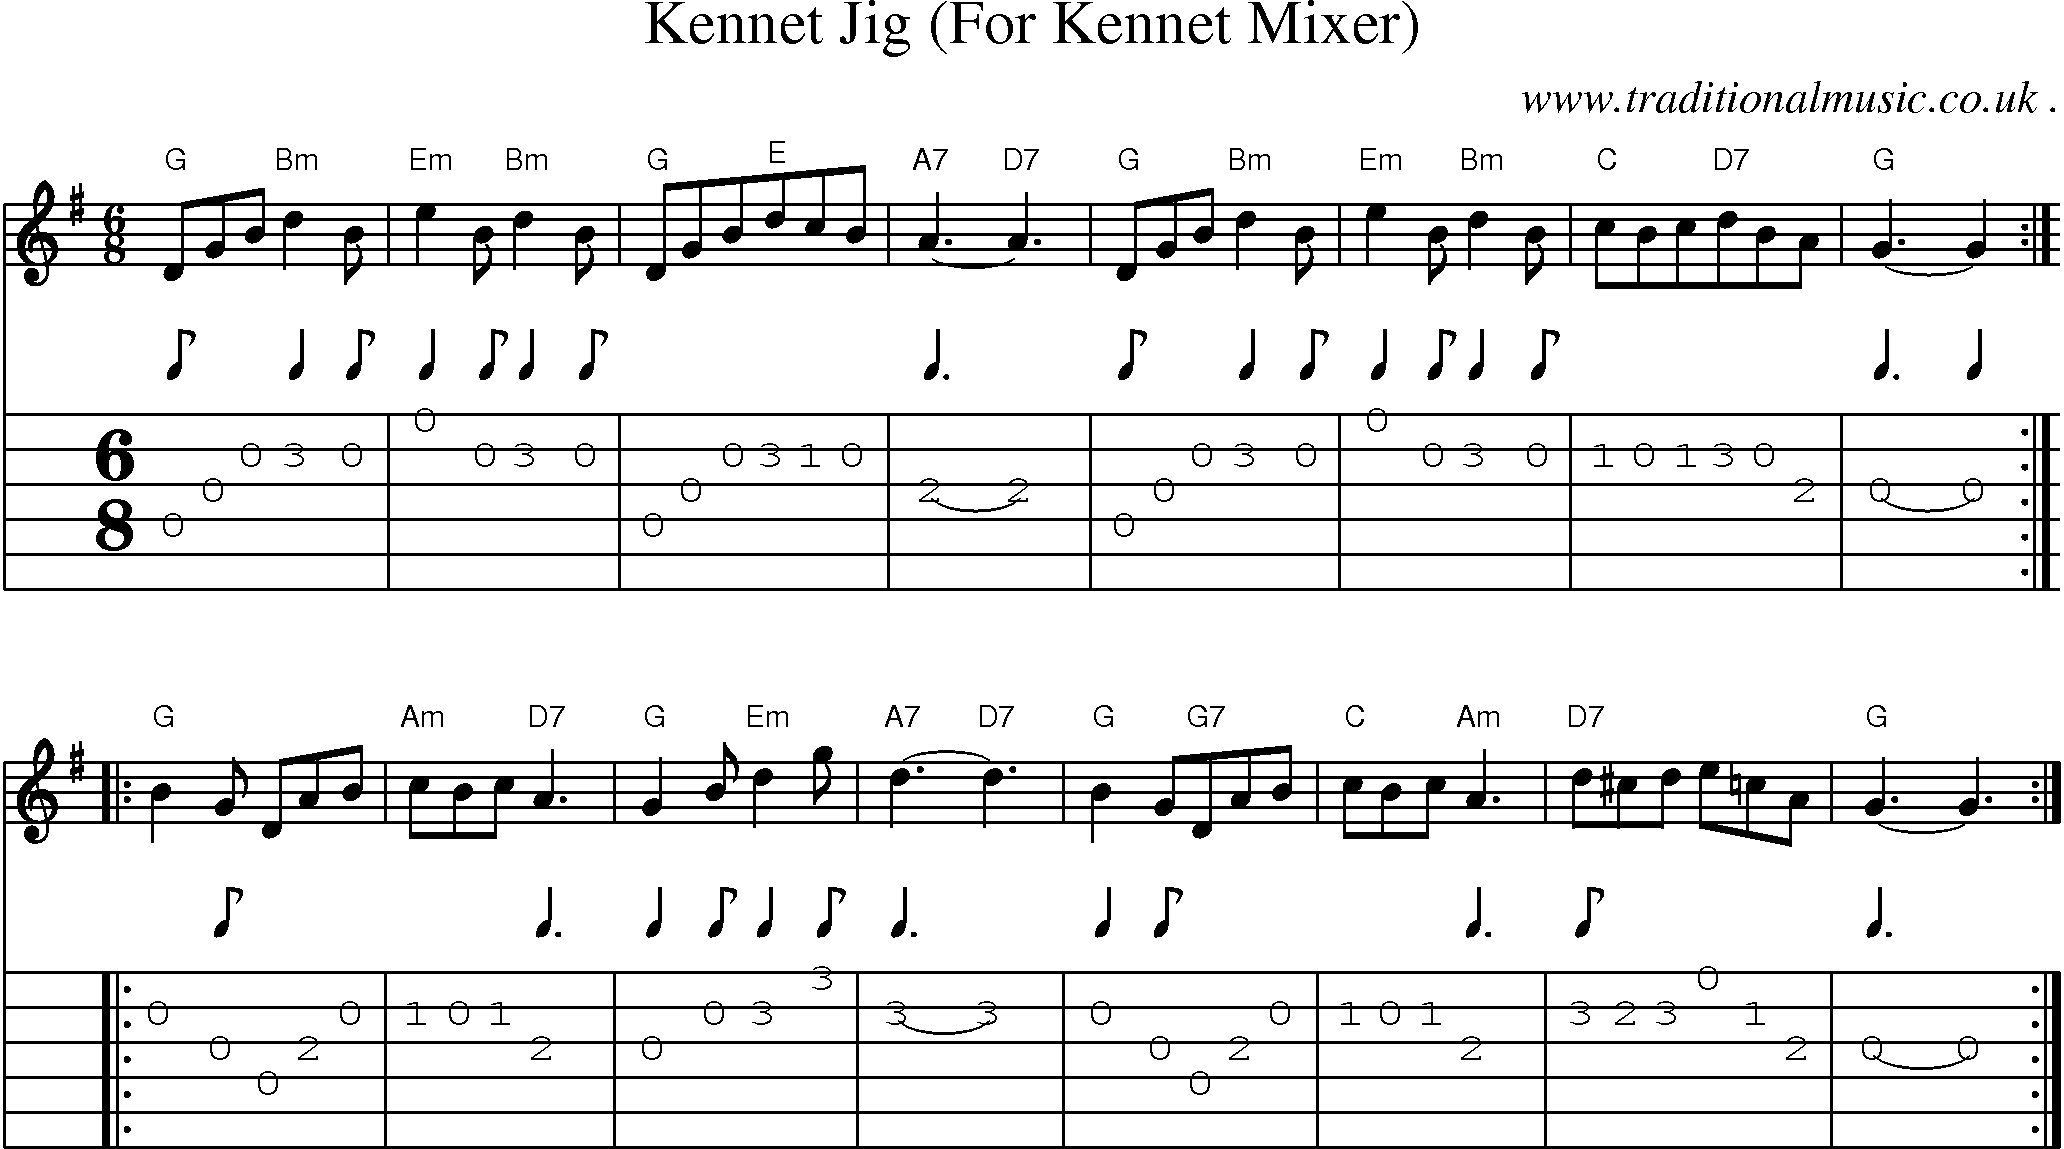 Sheet-Music and Guitar Tabs for Kennet Jig (for Kennet Mixer)